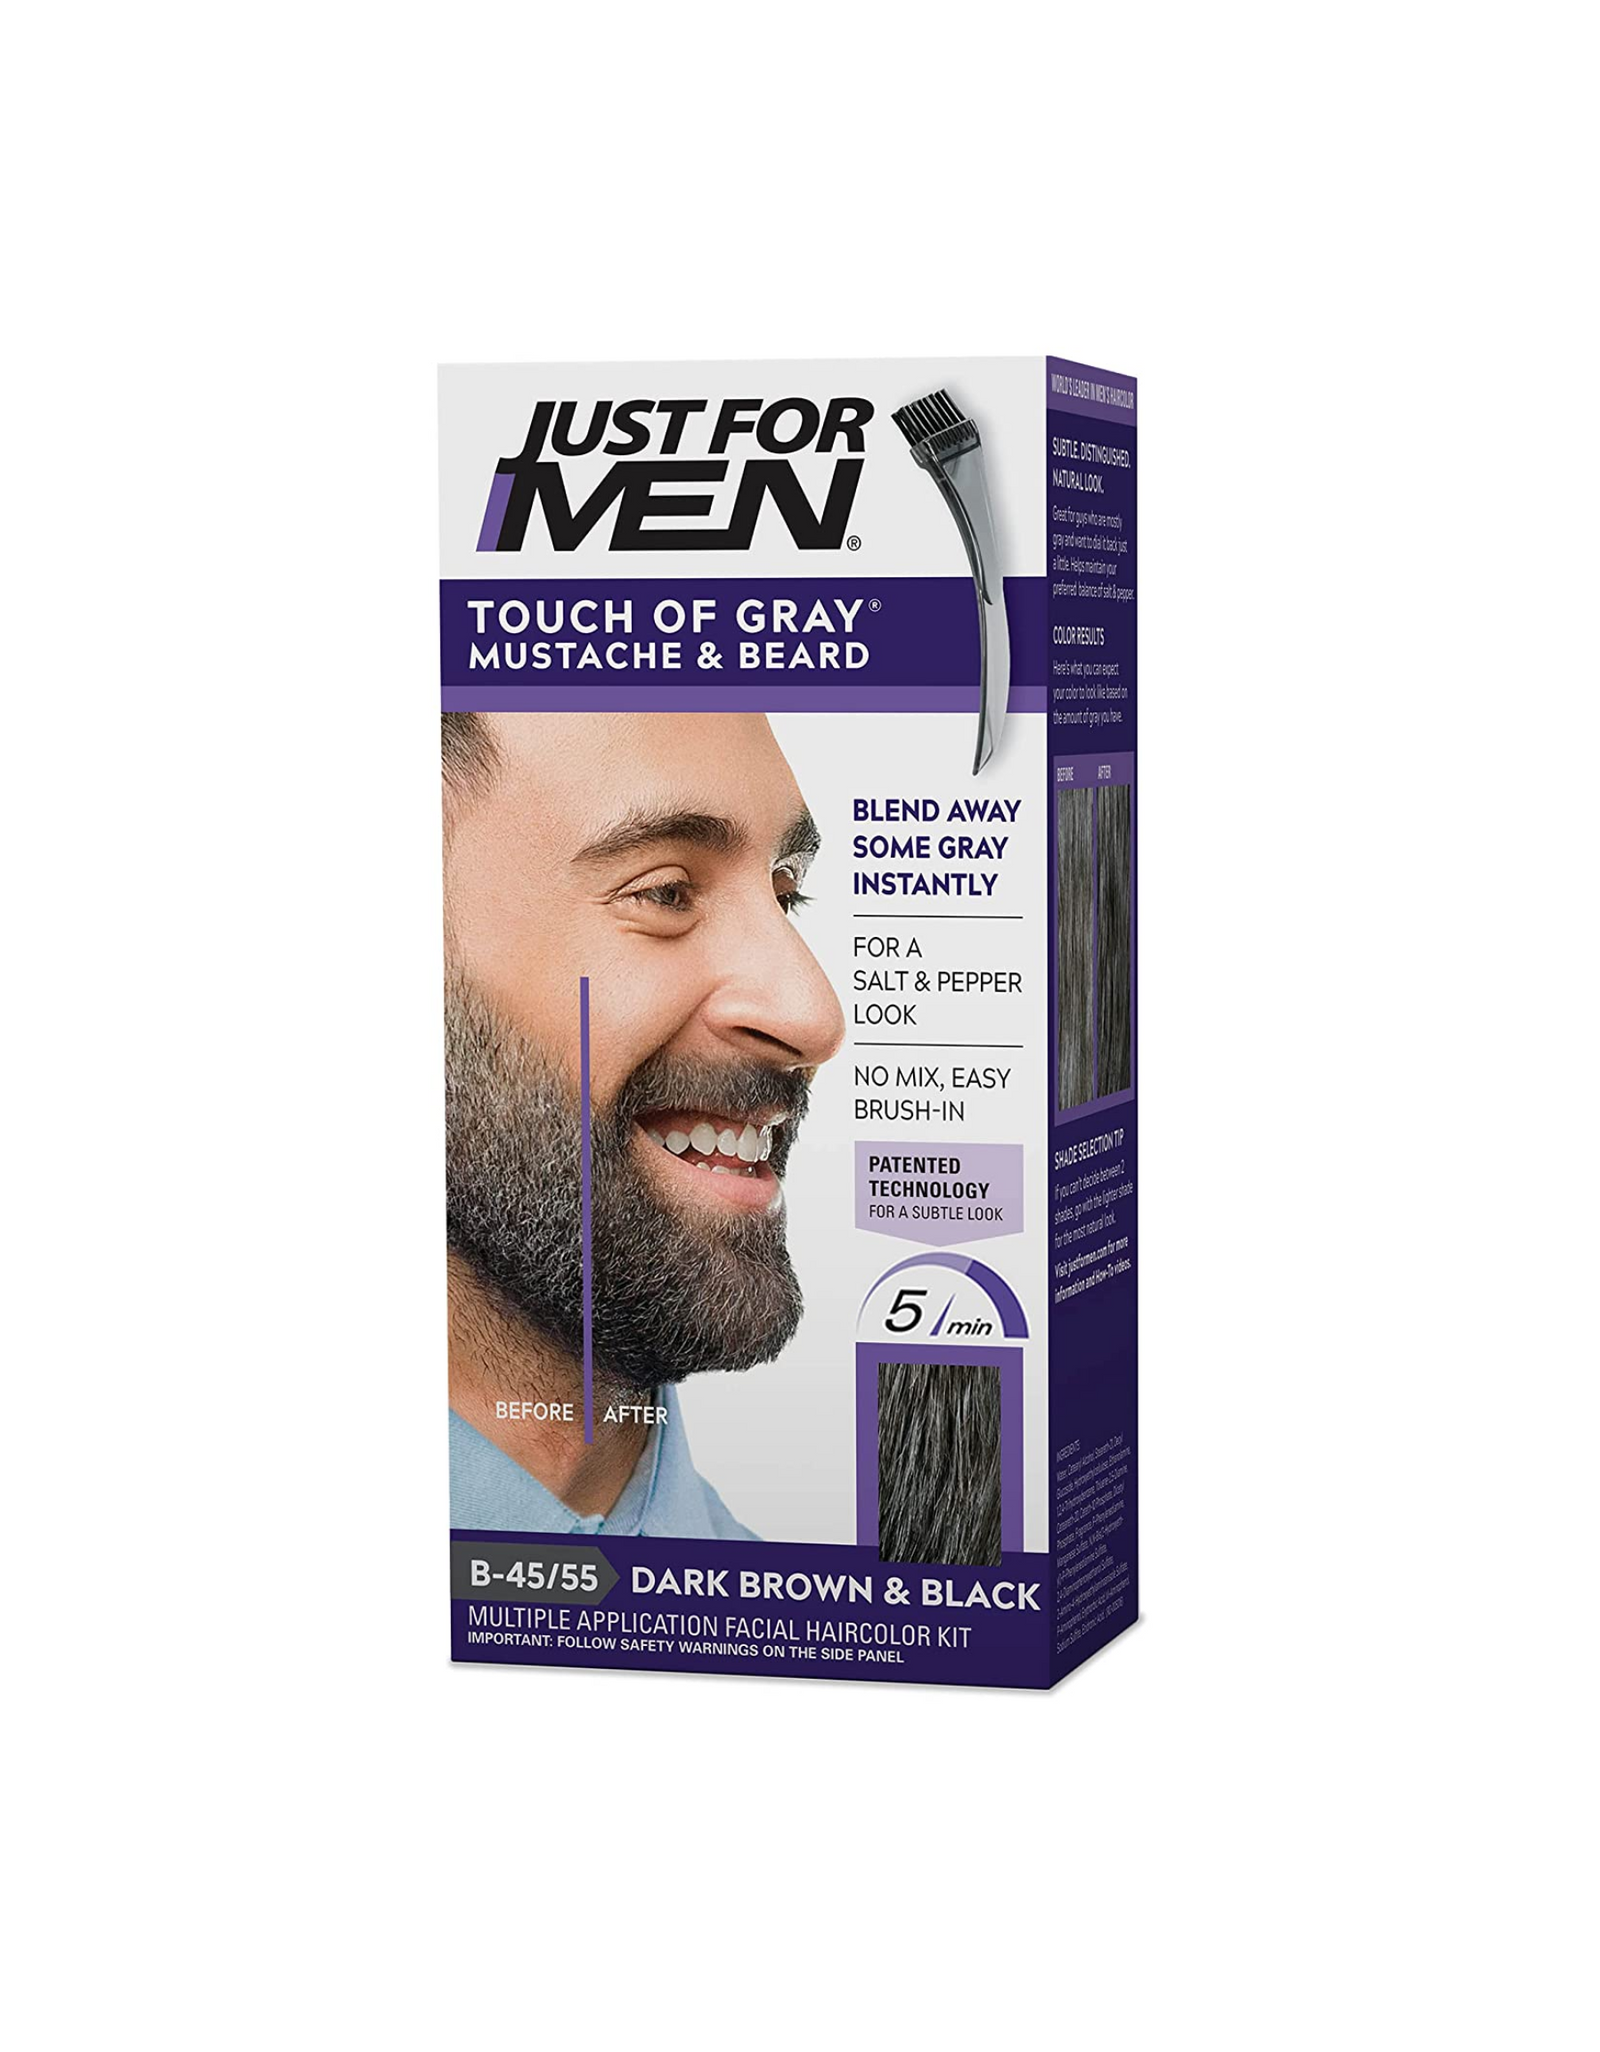 Just For Men Touch of Gray Mustache & Beard, Beard Coloring for Gray Hair with Brush Included for Easy Application, Dark Brown & Black, B-45/55